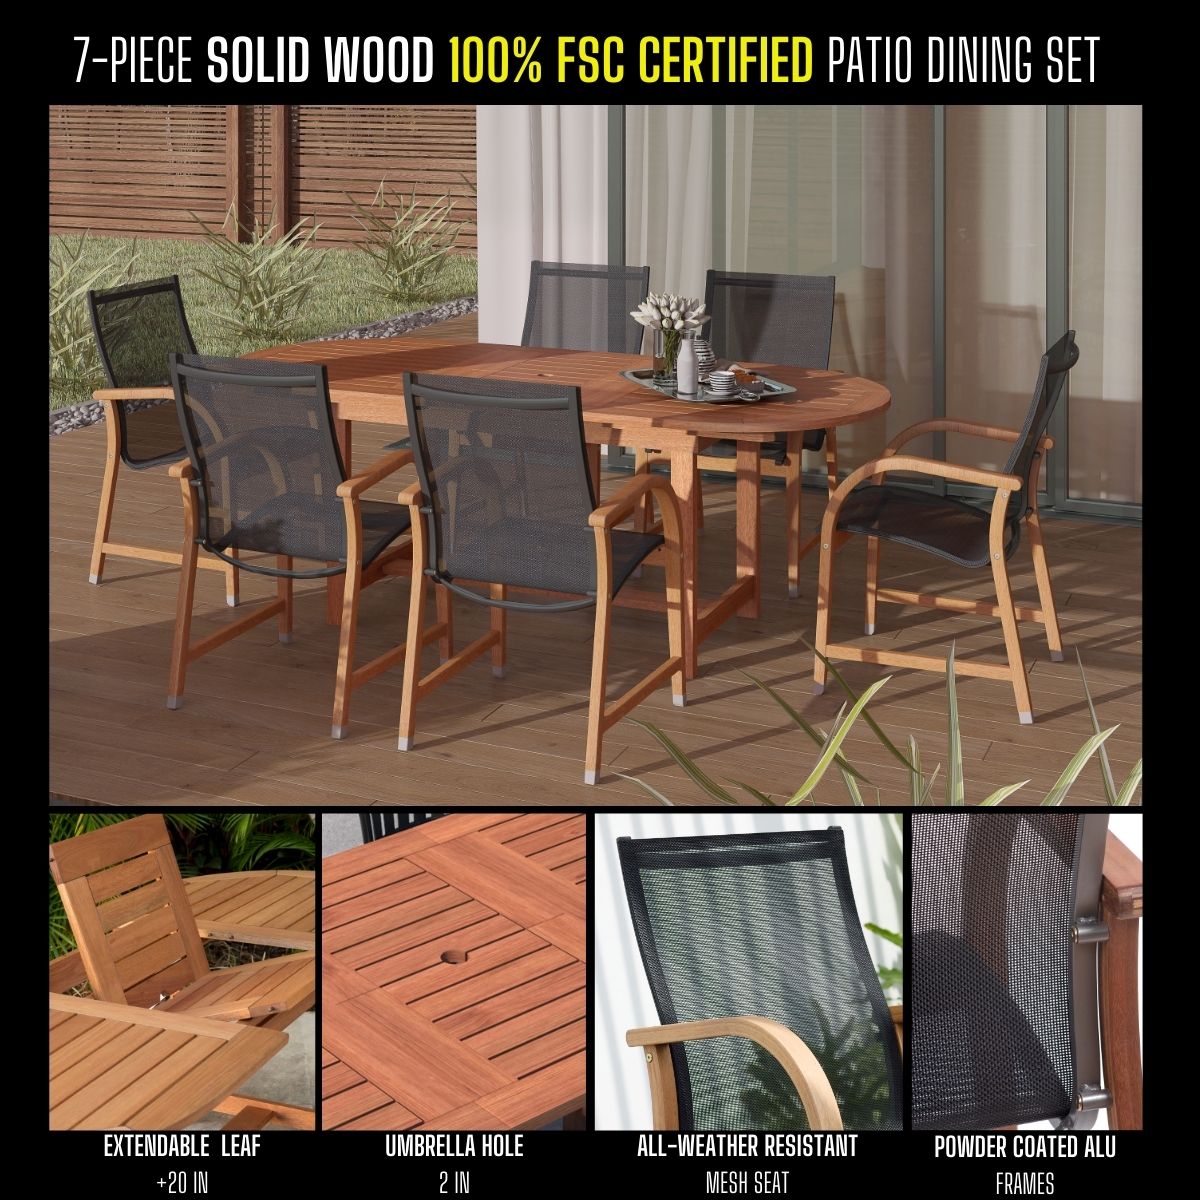 Amazonia Bahamas 7-Piece Extendable Oval Patio Dining Set, Solid Wood 100% FSC Certified - image 2 of 11